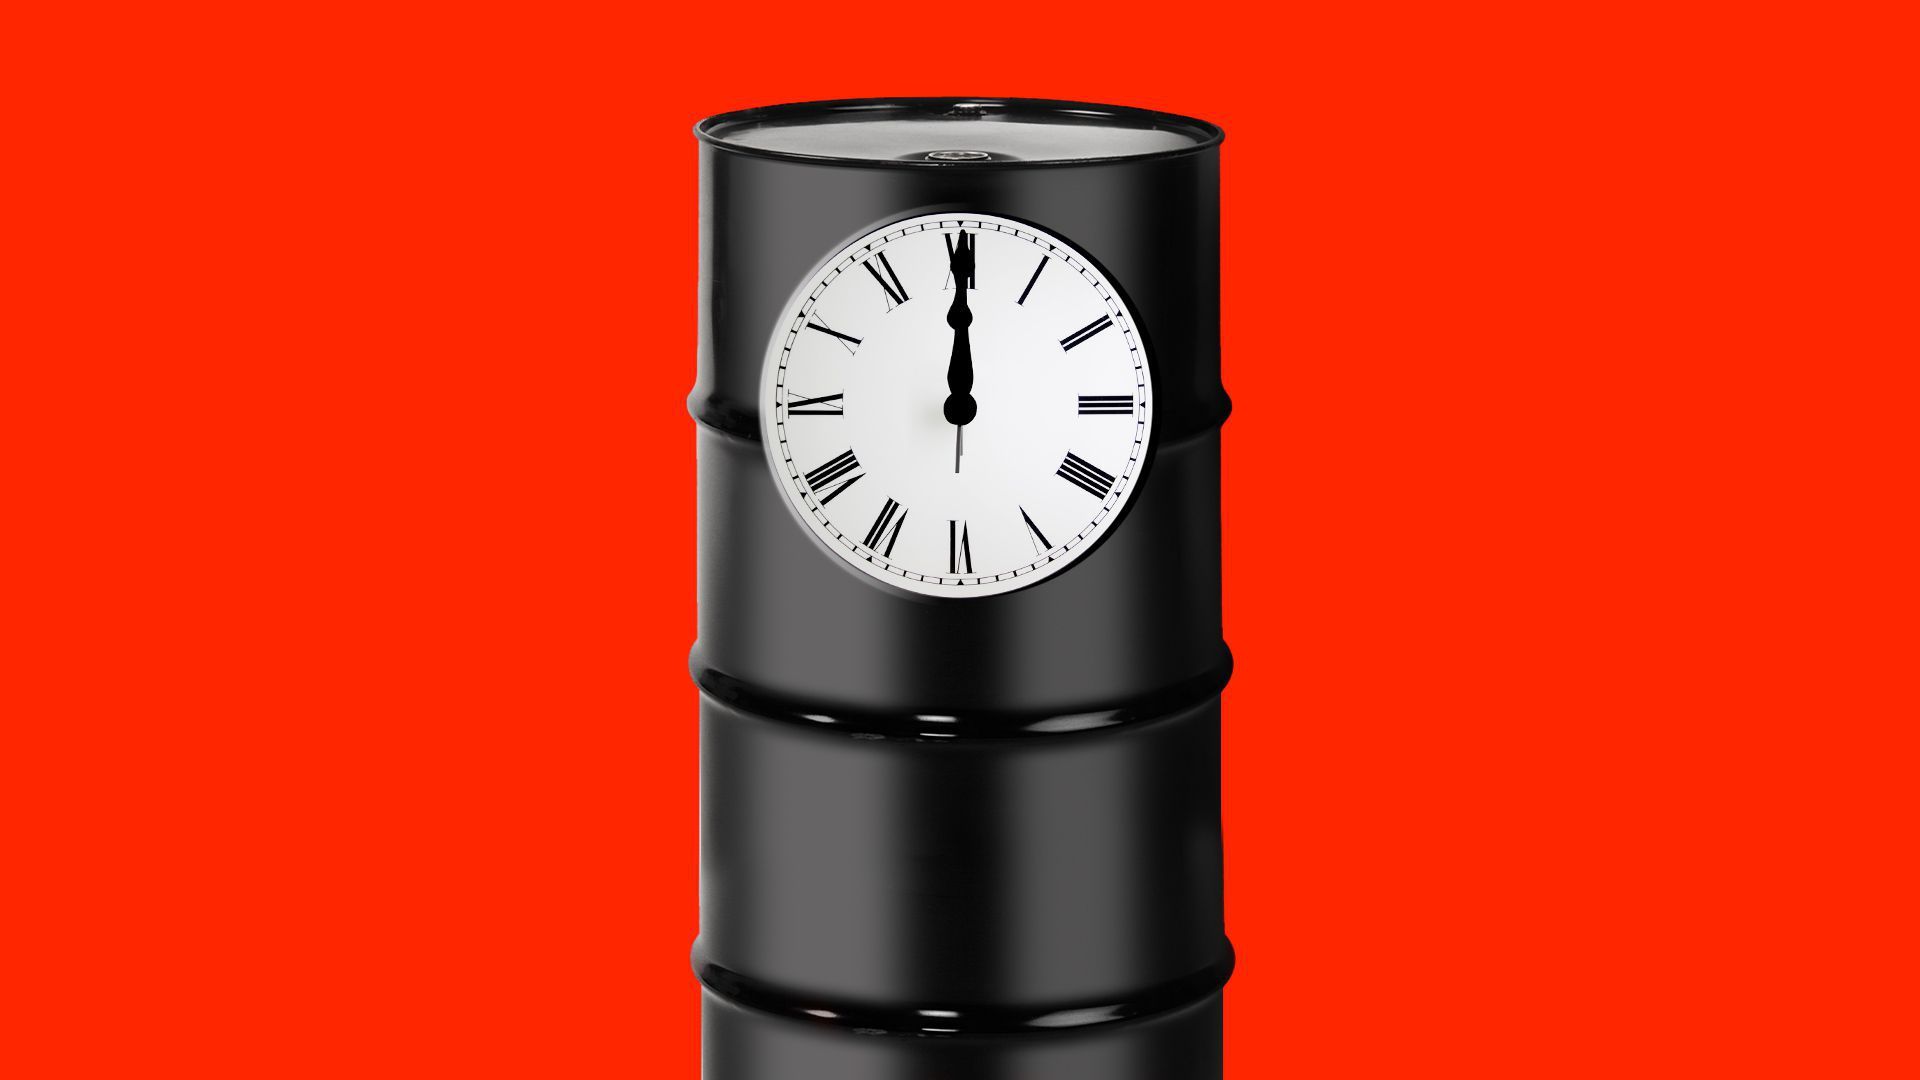 Illustration showing an oil barrel with a clock on it.